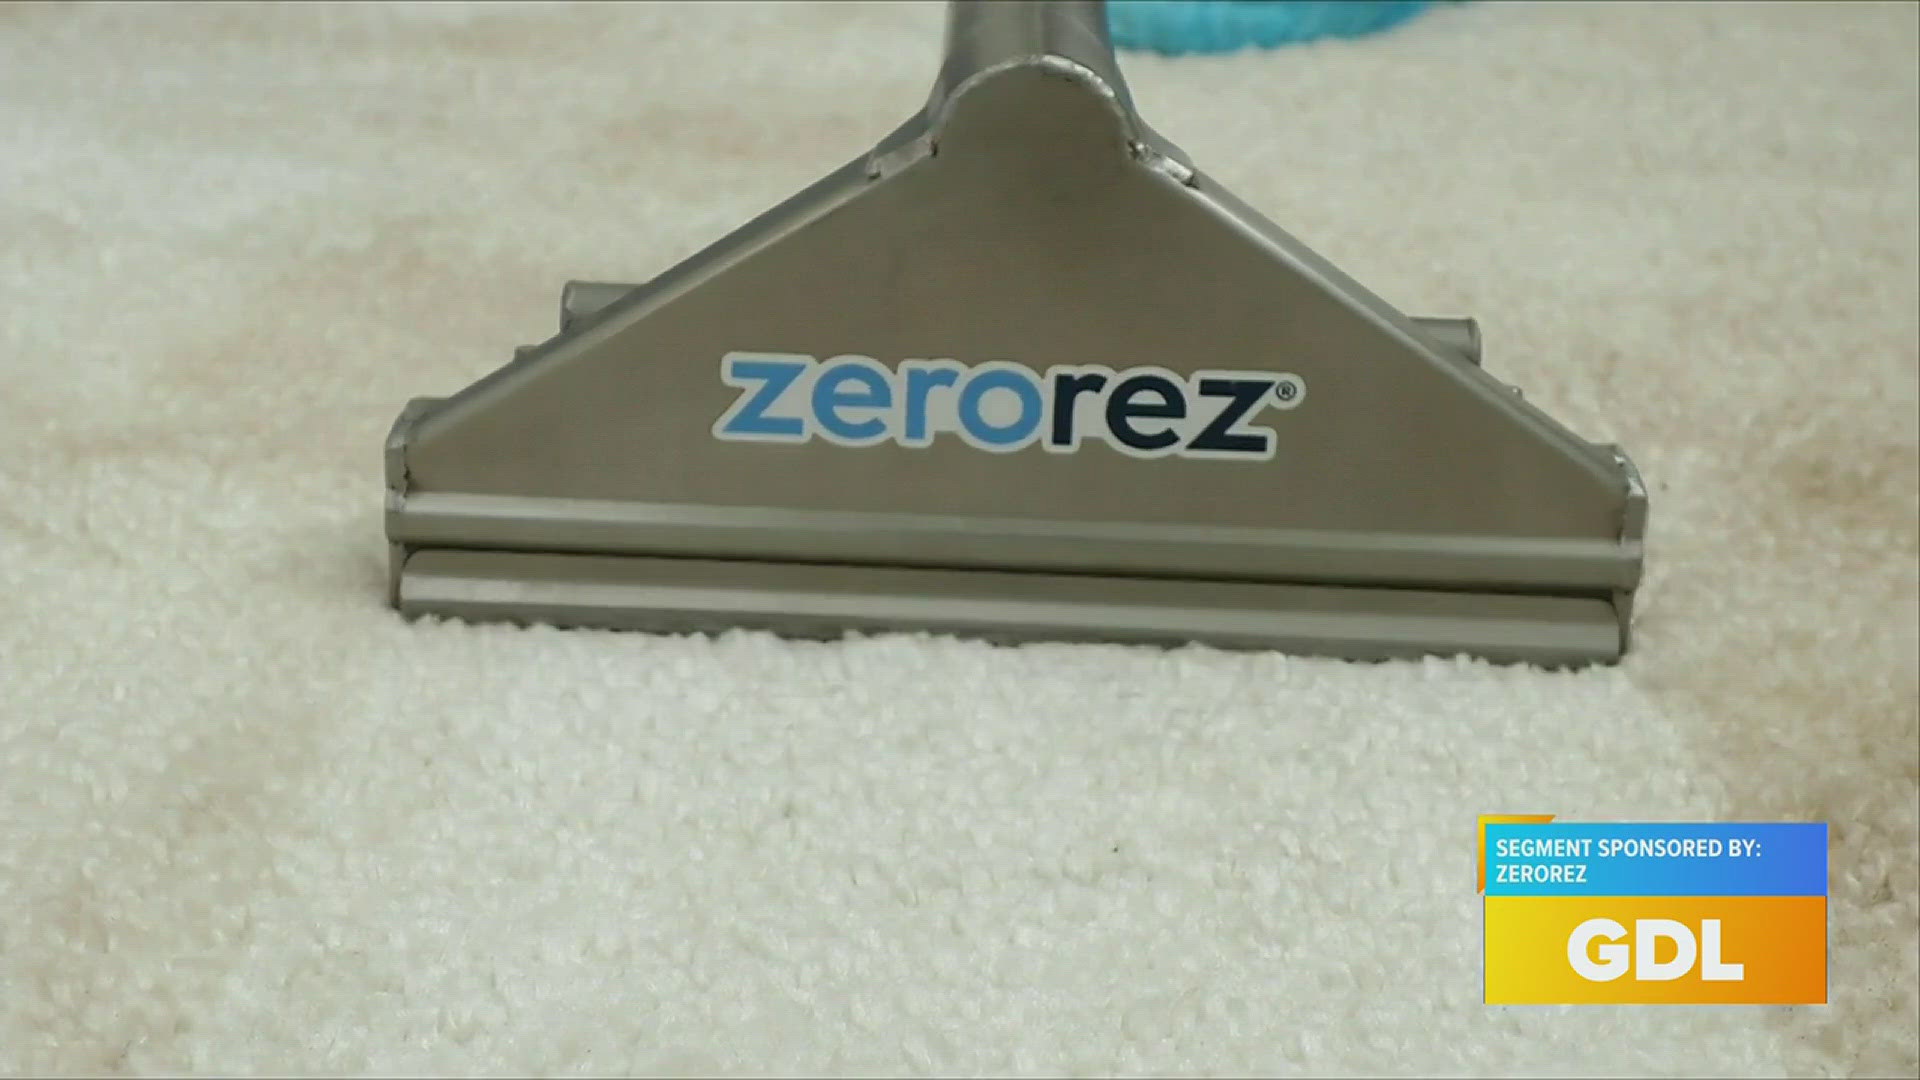 Zerorez Can Deep Clean Your Home for the Spring!